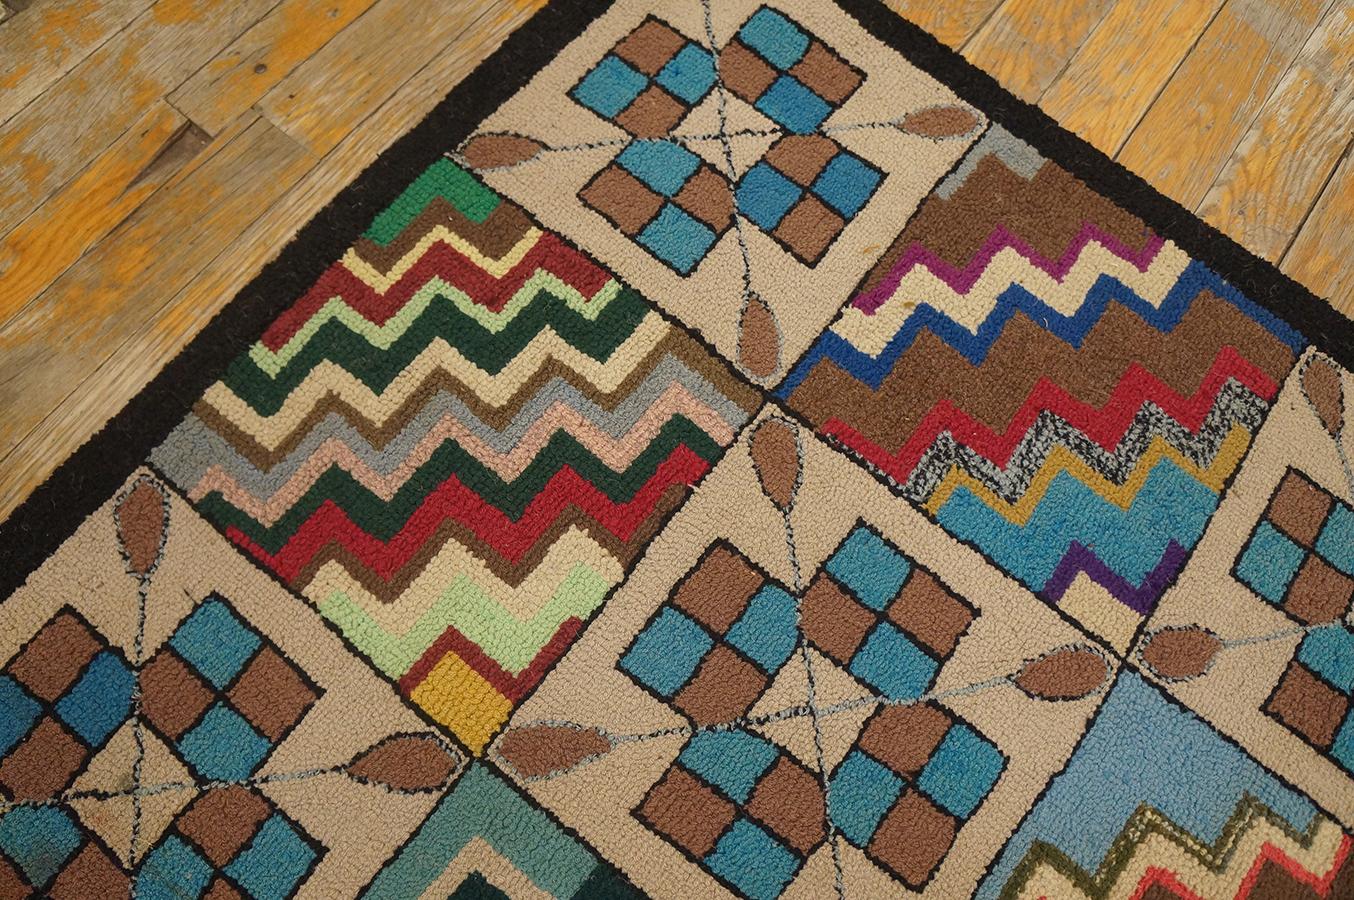  Antique American Hooked Rug 2'3